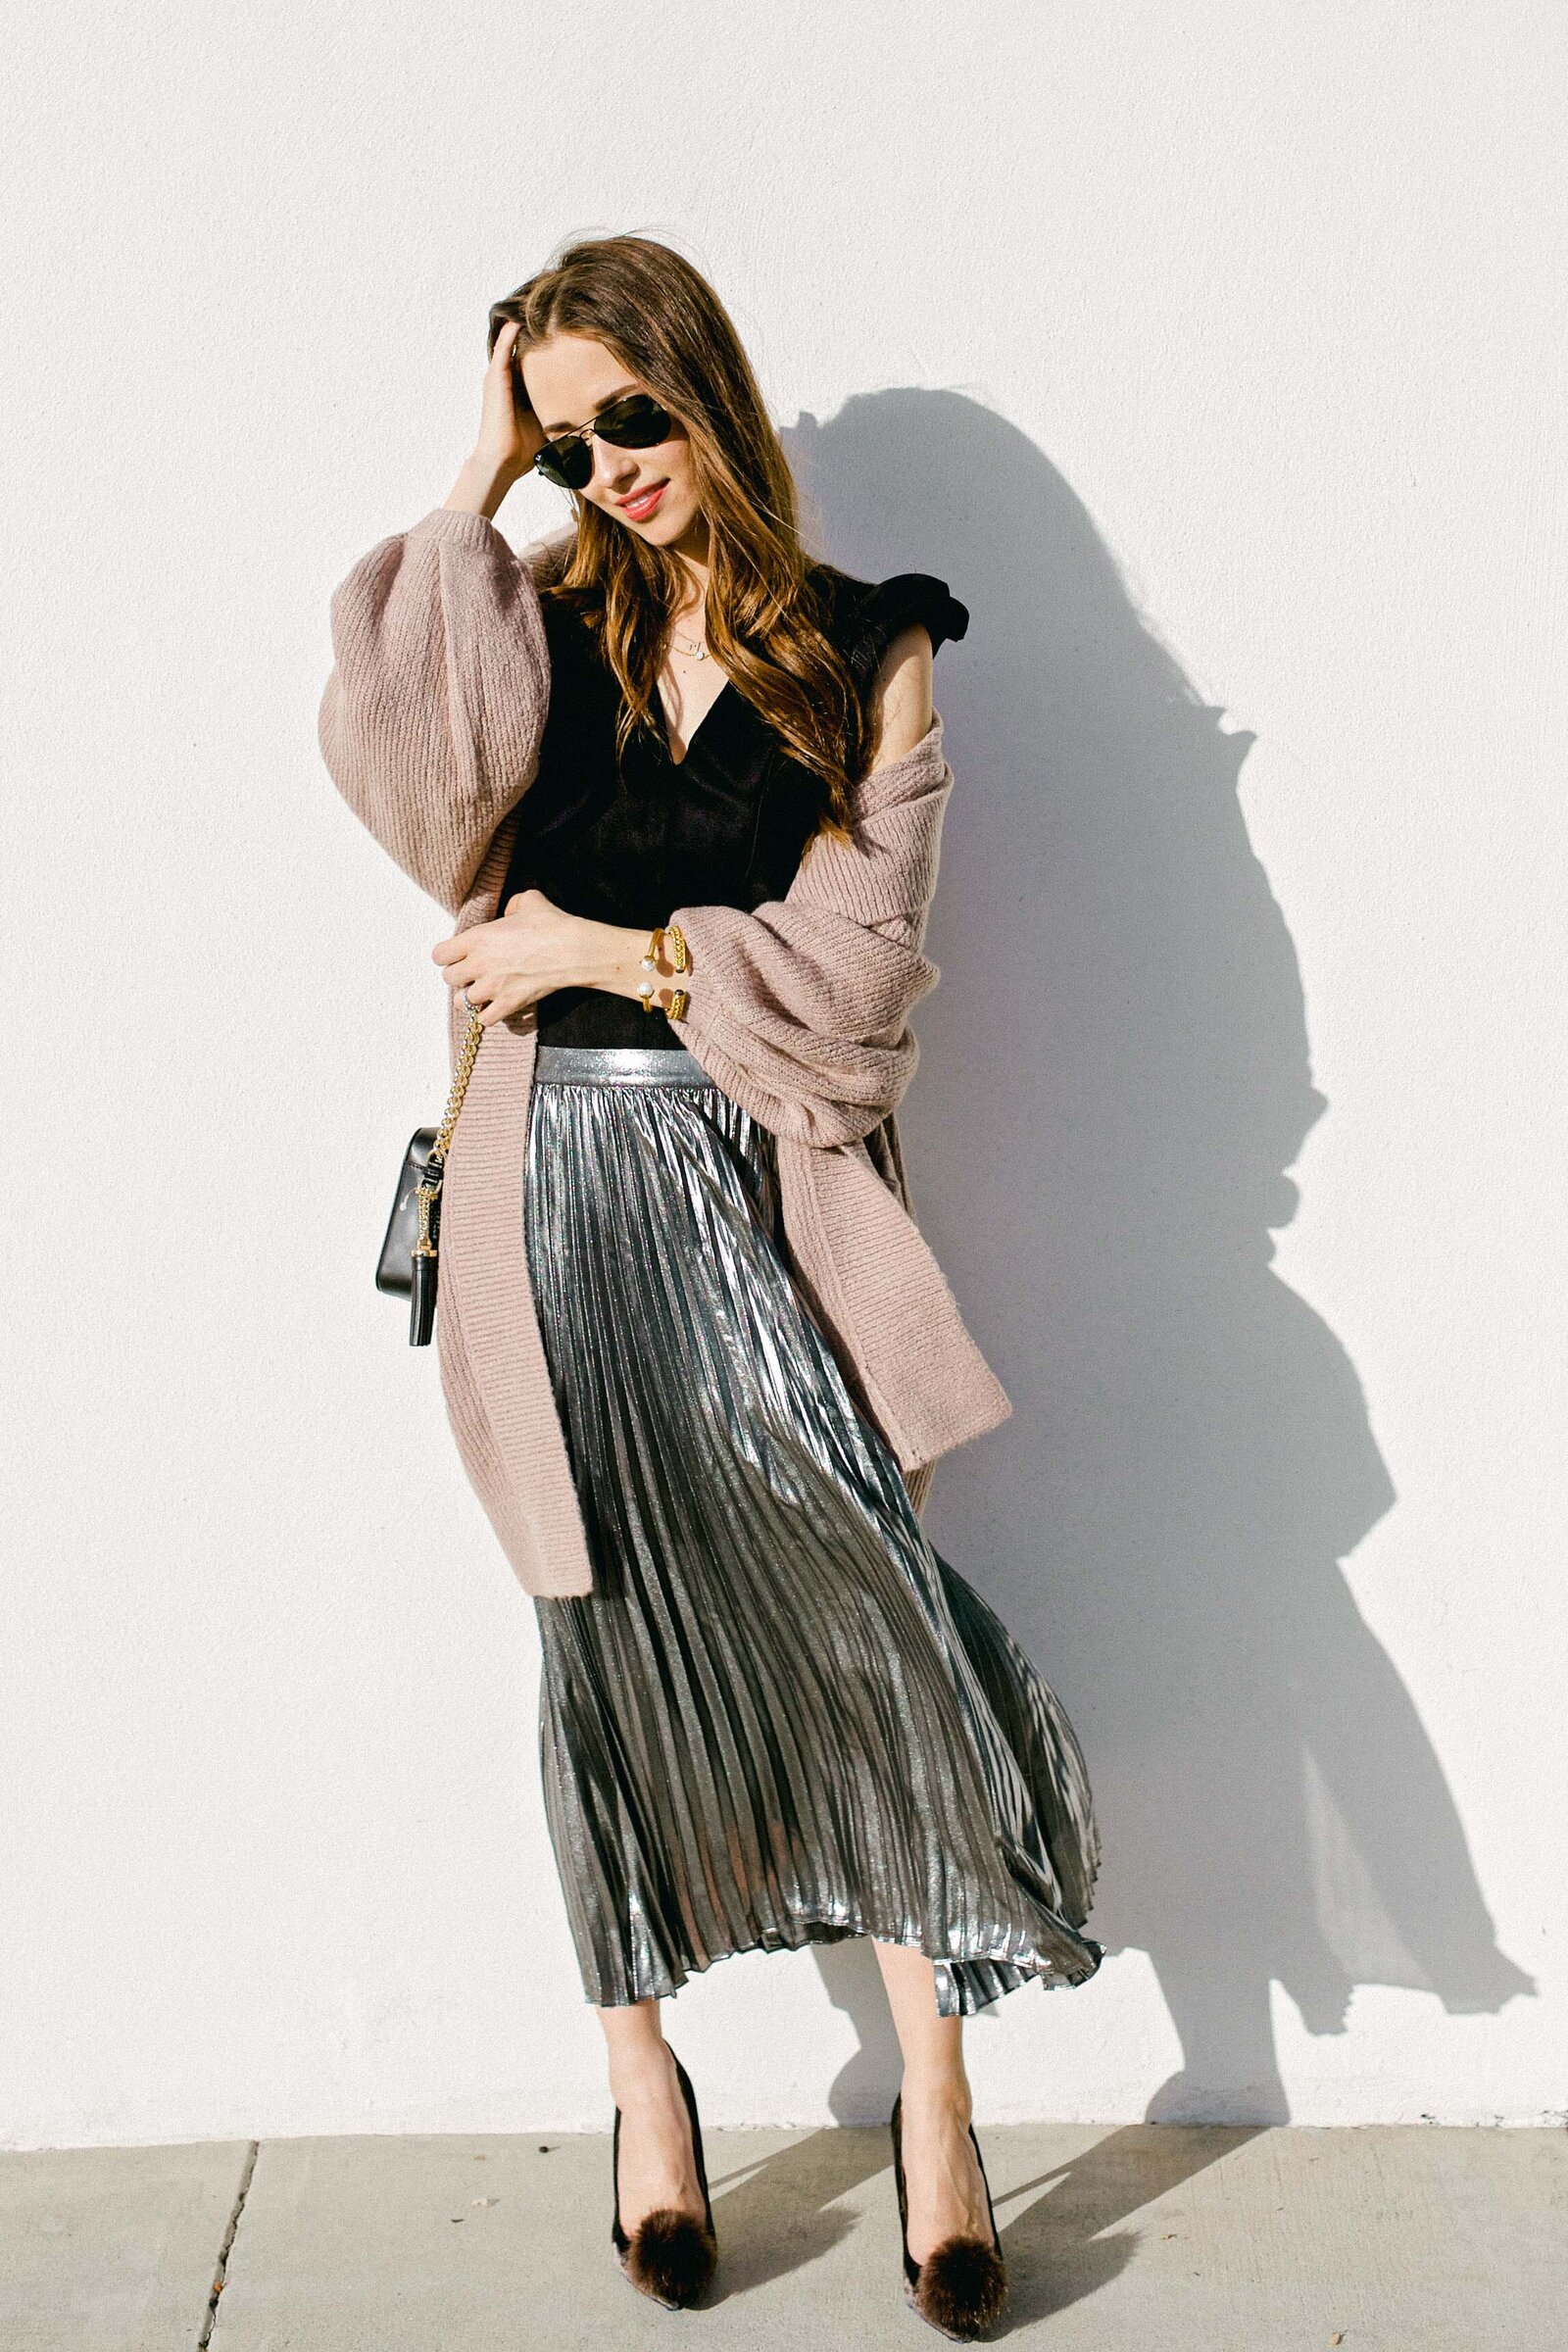 Fashion Blogger M Loves M in midi skirt outfit by fashion branding photographer Chelsea Loren San Diego